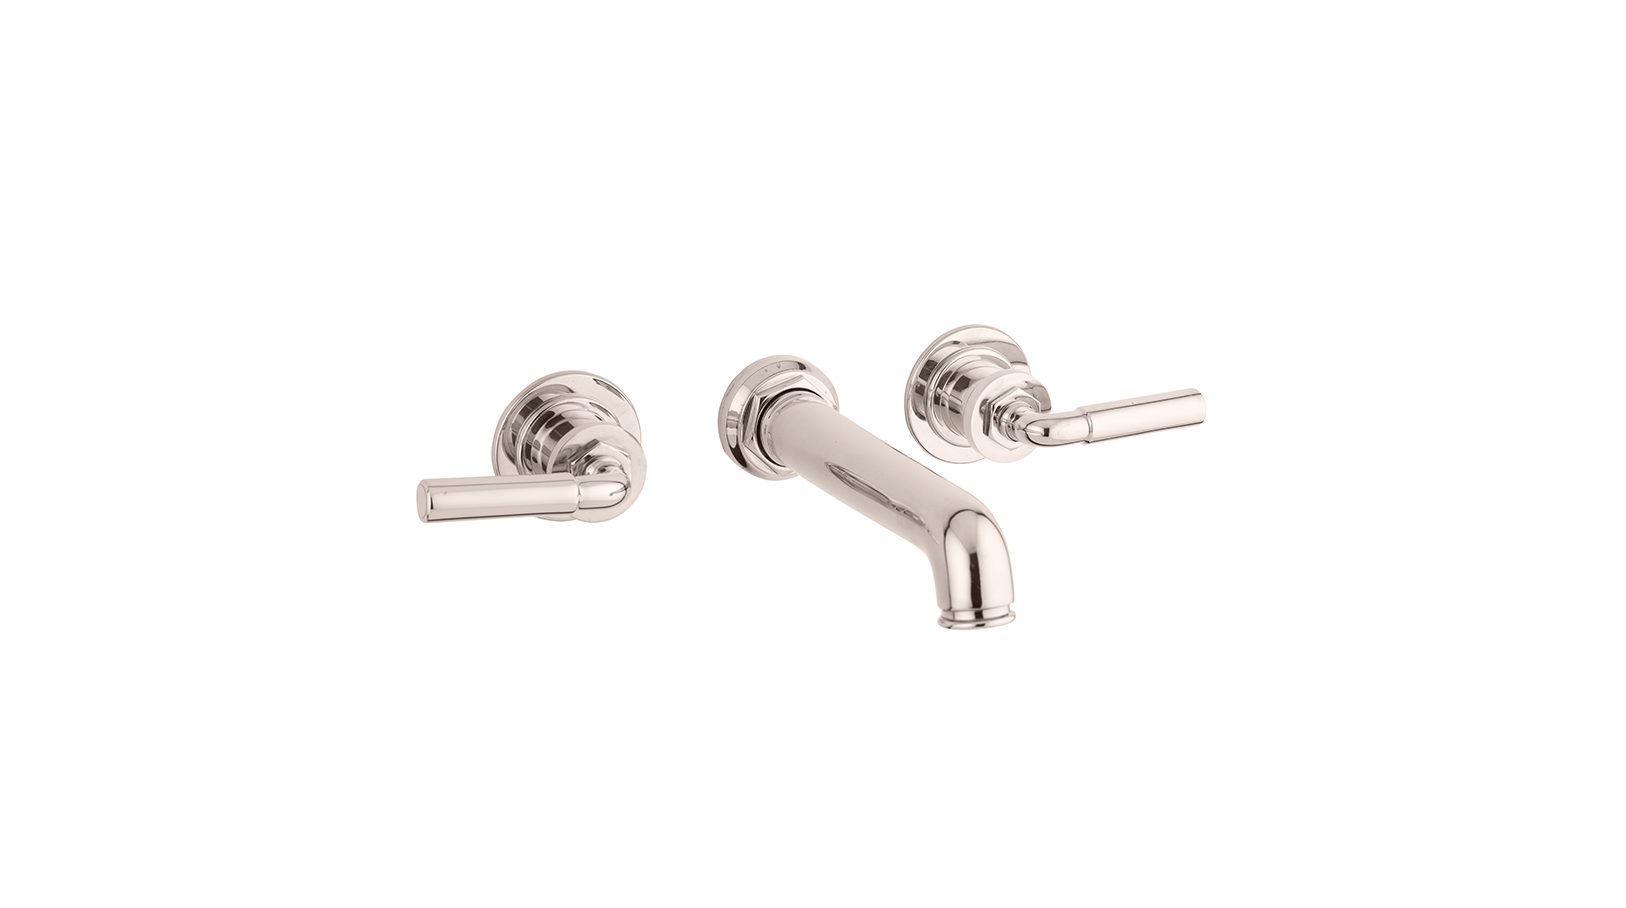 The Bestwood Lever Wall Mounted 3-Hole Bath Mixer